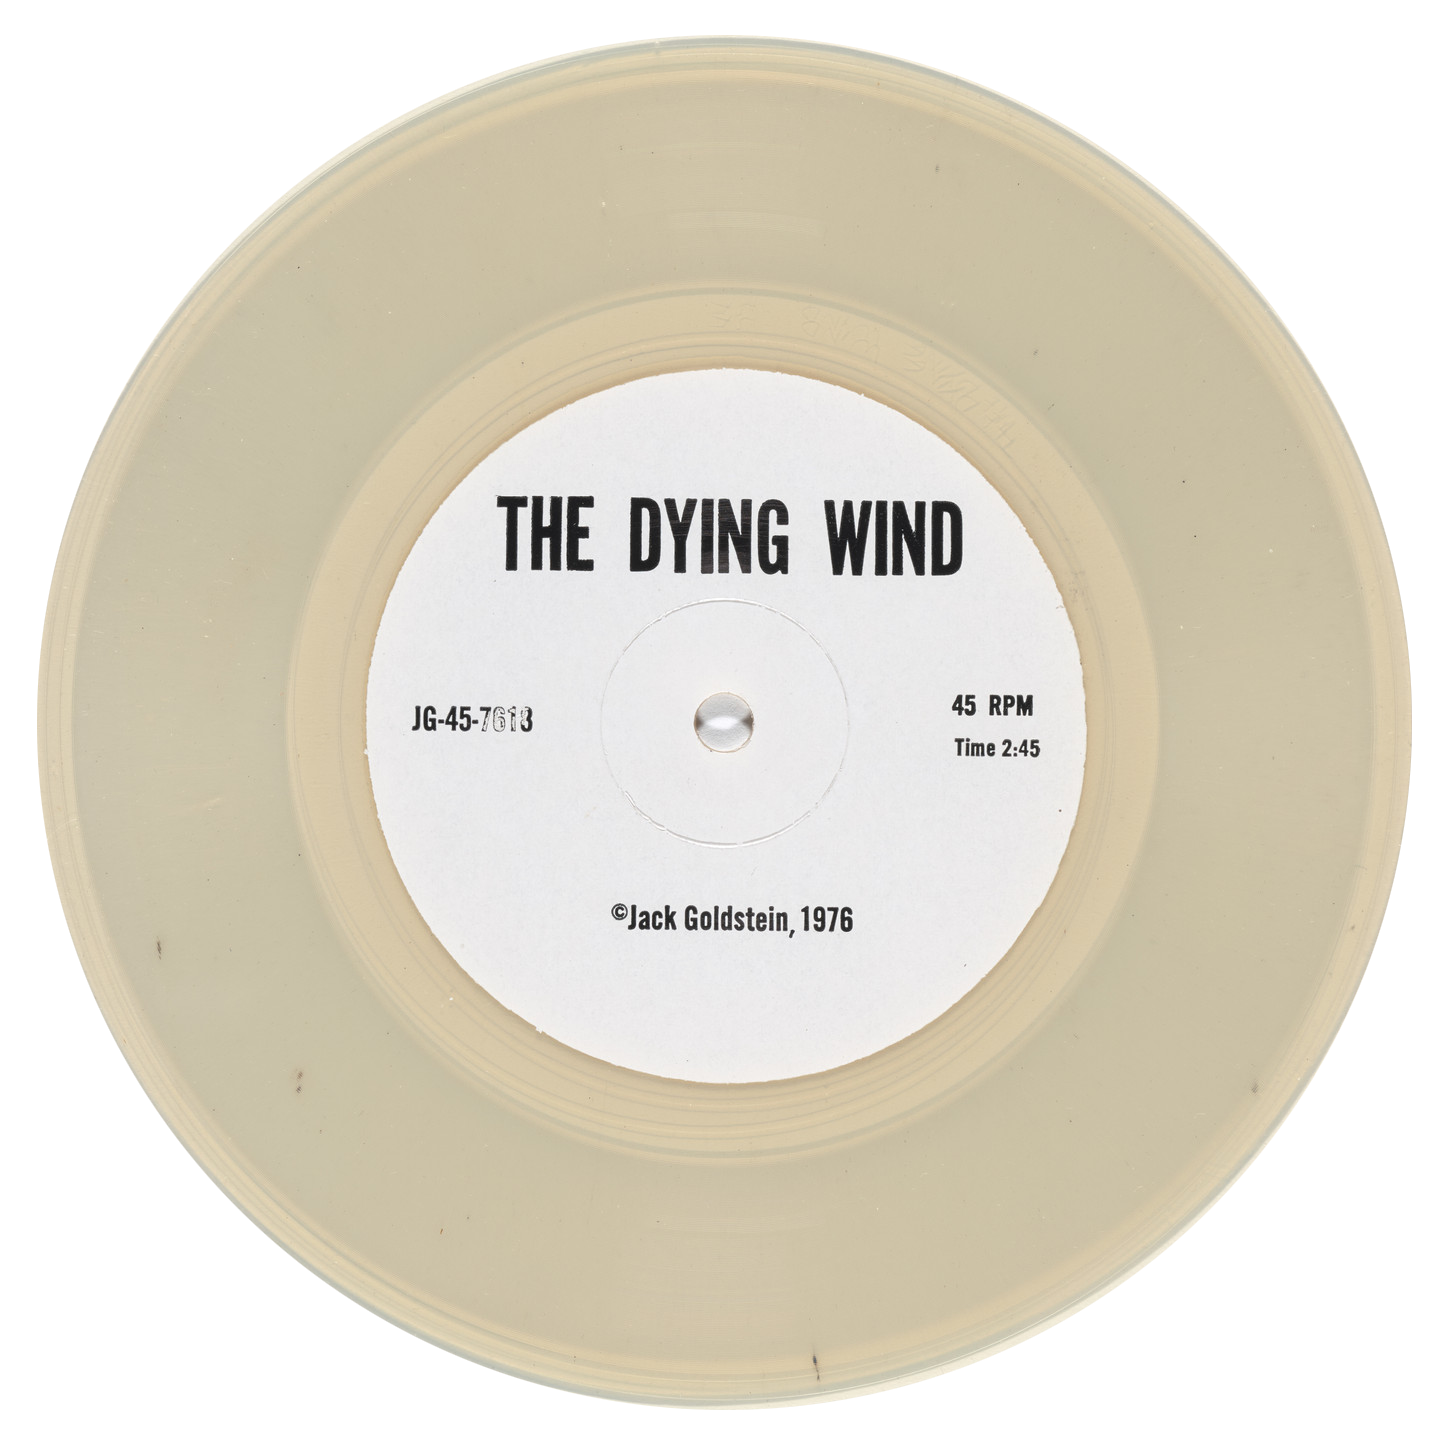  The DYing Wing
Clear vinyl - 45 rpm 7-inch record

The Dying Wing is one of the nine components of :
A Suite of Nine 45 rpm 7-Inch Records with Sound Effects
1976